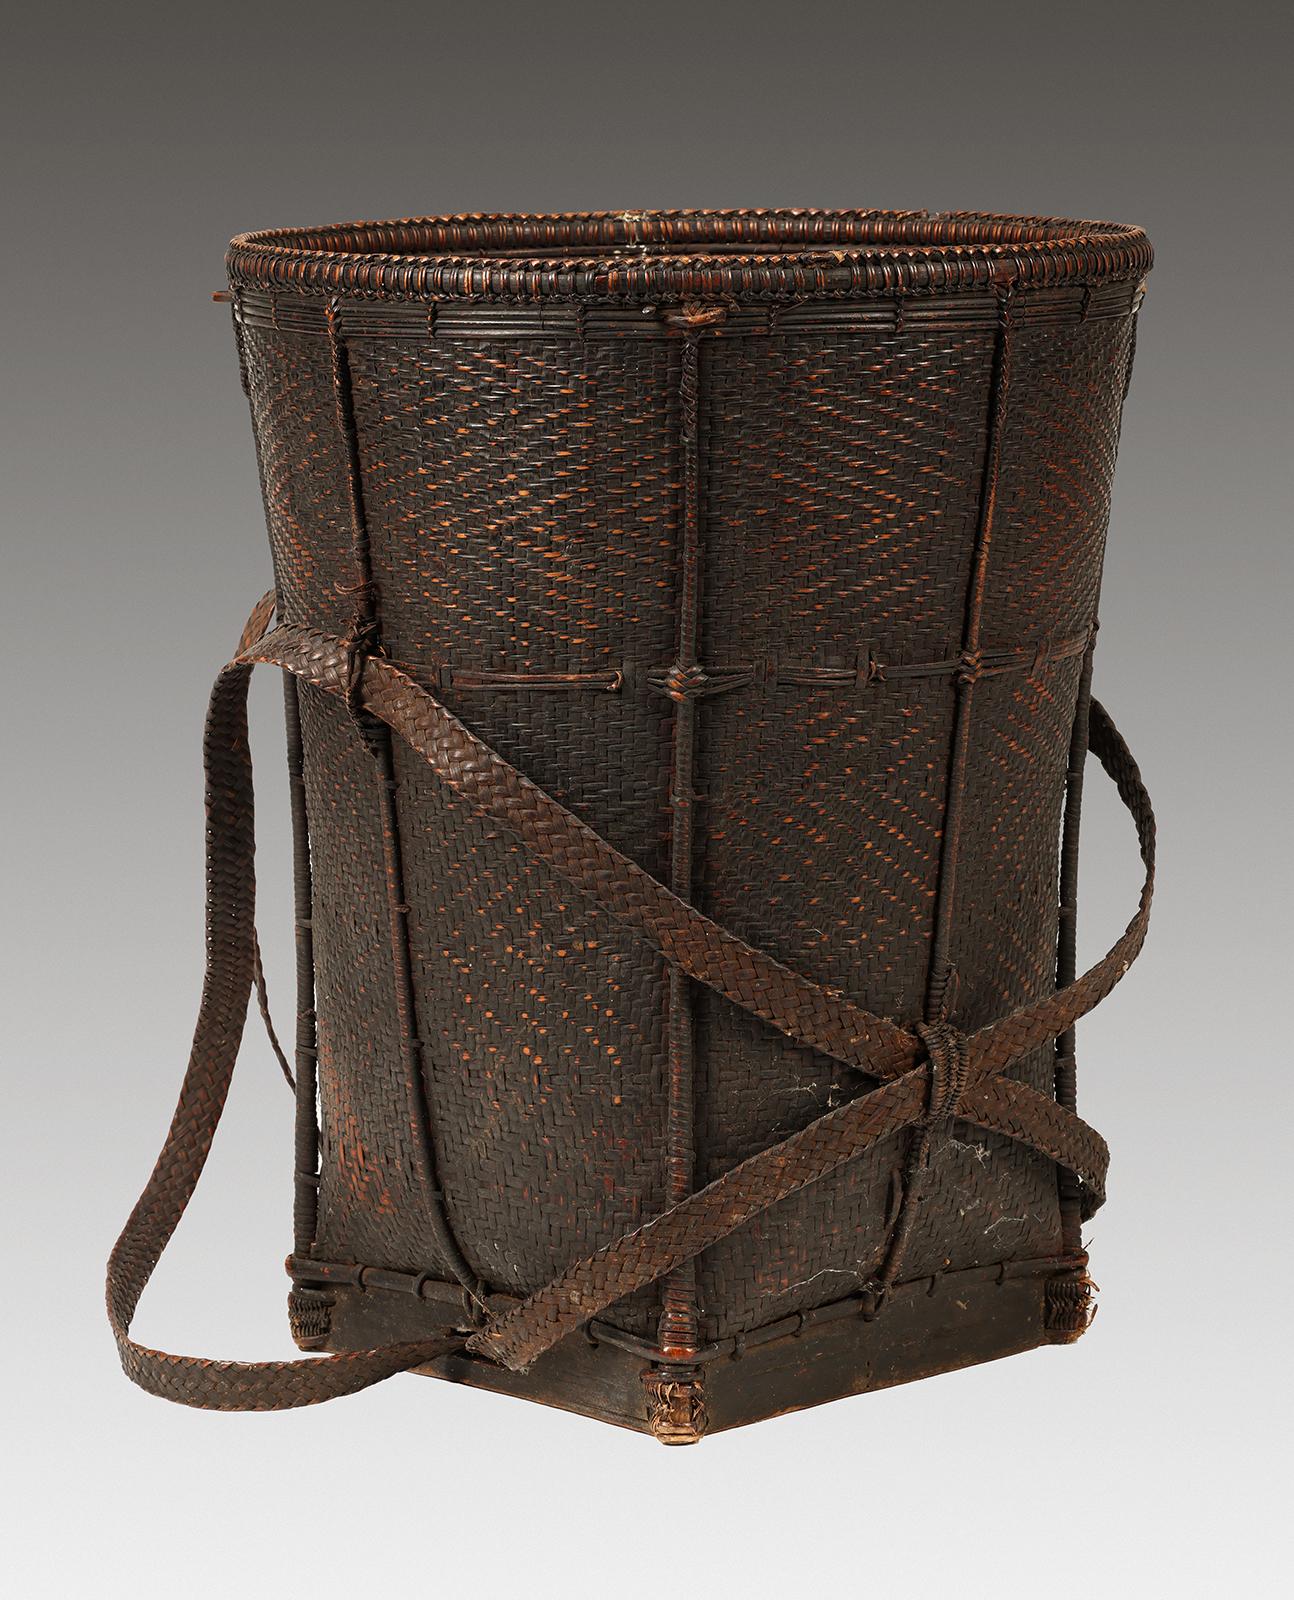 Tall Backpack Basket
Laos
Mid 20th century (or earlier)
Bamboo and rattan, twill weave
16.5″ high x 13″ diameter at top (42 x 33 cm)

From southern Laos, mostly rattan with some bamboo elements, used for foraging in the forest and carrying